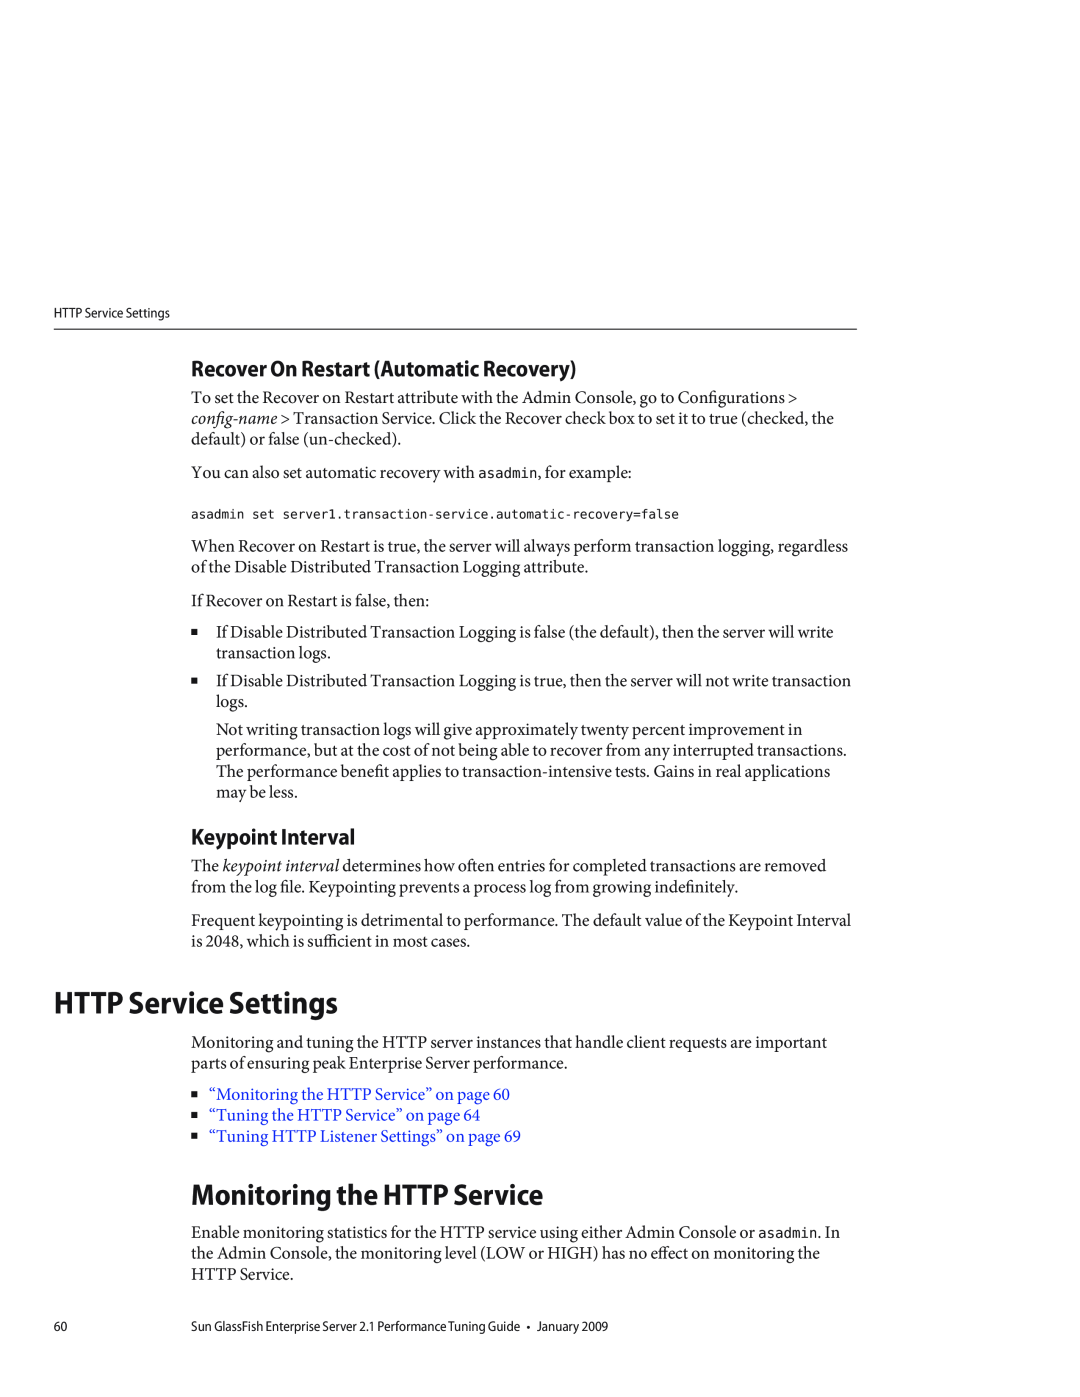 Sun Microsystems 820434310 manual HTTP Service Settings, Monitoring the HTTP Service, Recover On Restart Automatic Recovery 